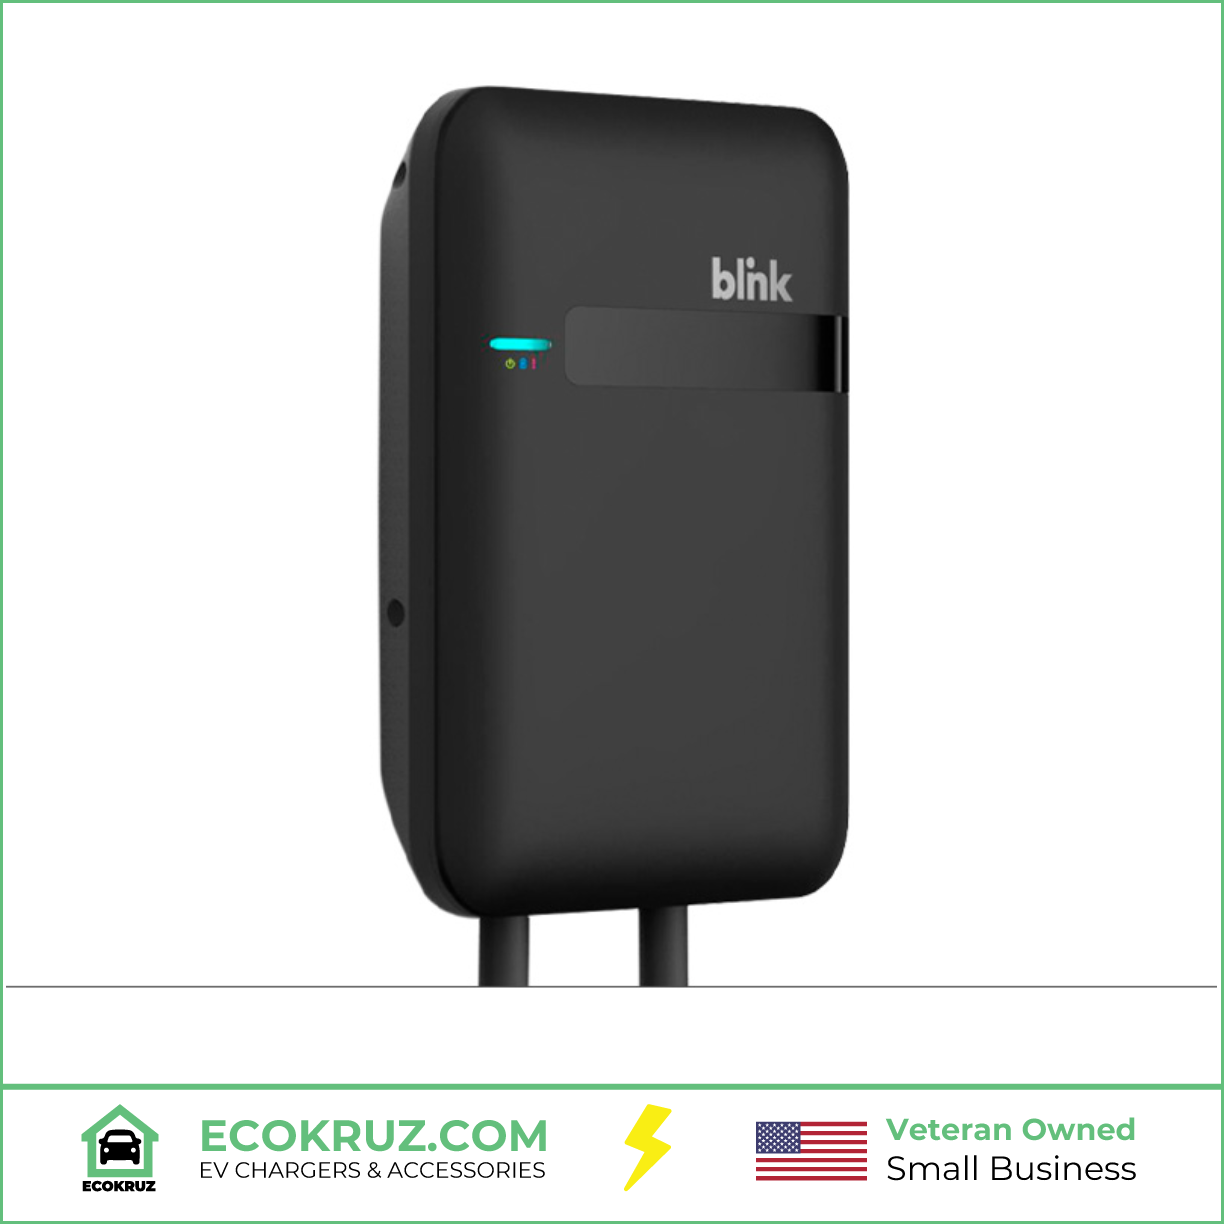 VW e-Golf BLINK HQ 150 32A 240V 7.68kW Residential EV Charger Charging Station Wallbox NEMA 6-50 25ft Cable